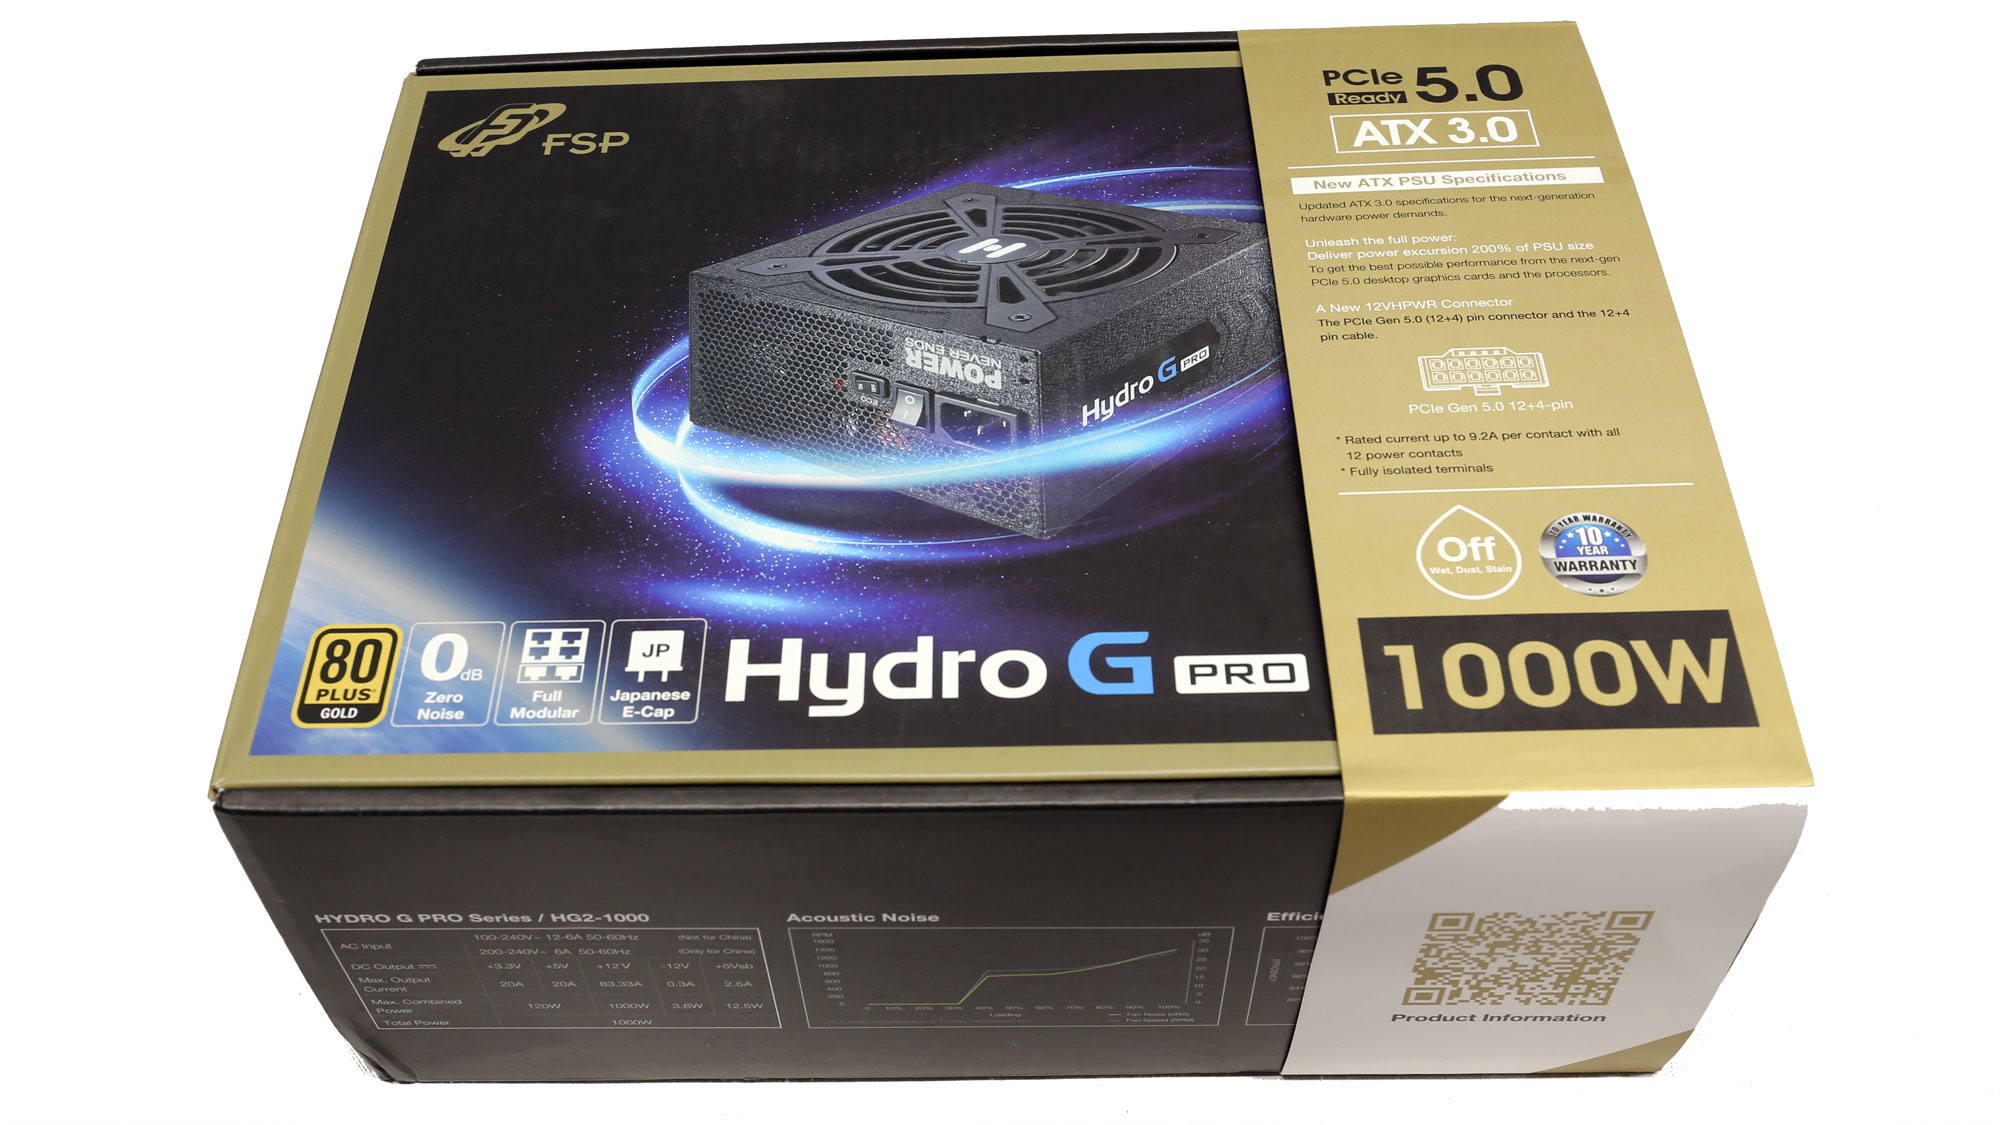 FSP Hydro G Pro 1000W ATX v3.0 in test - How good is cheap?